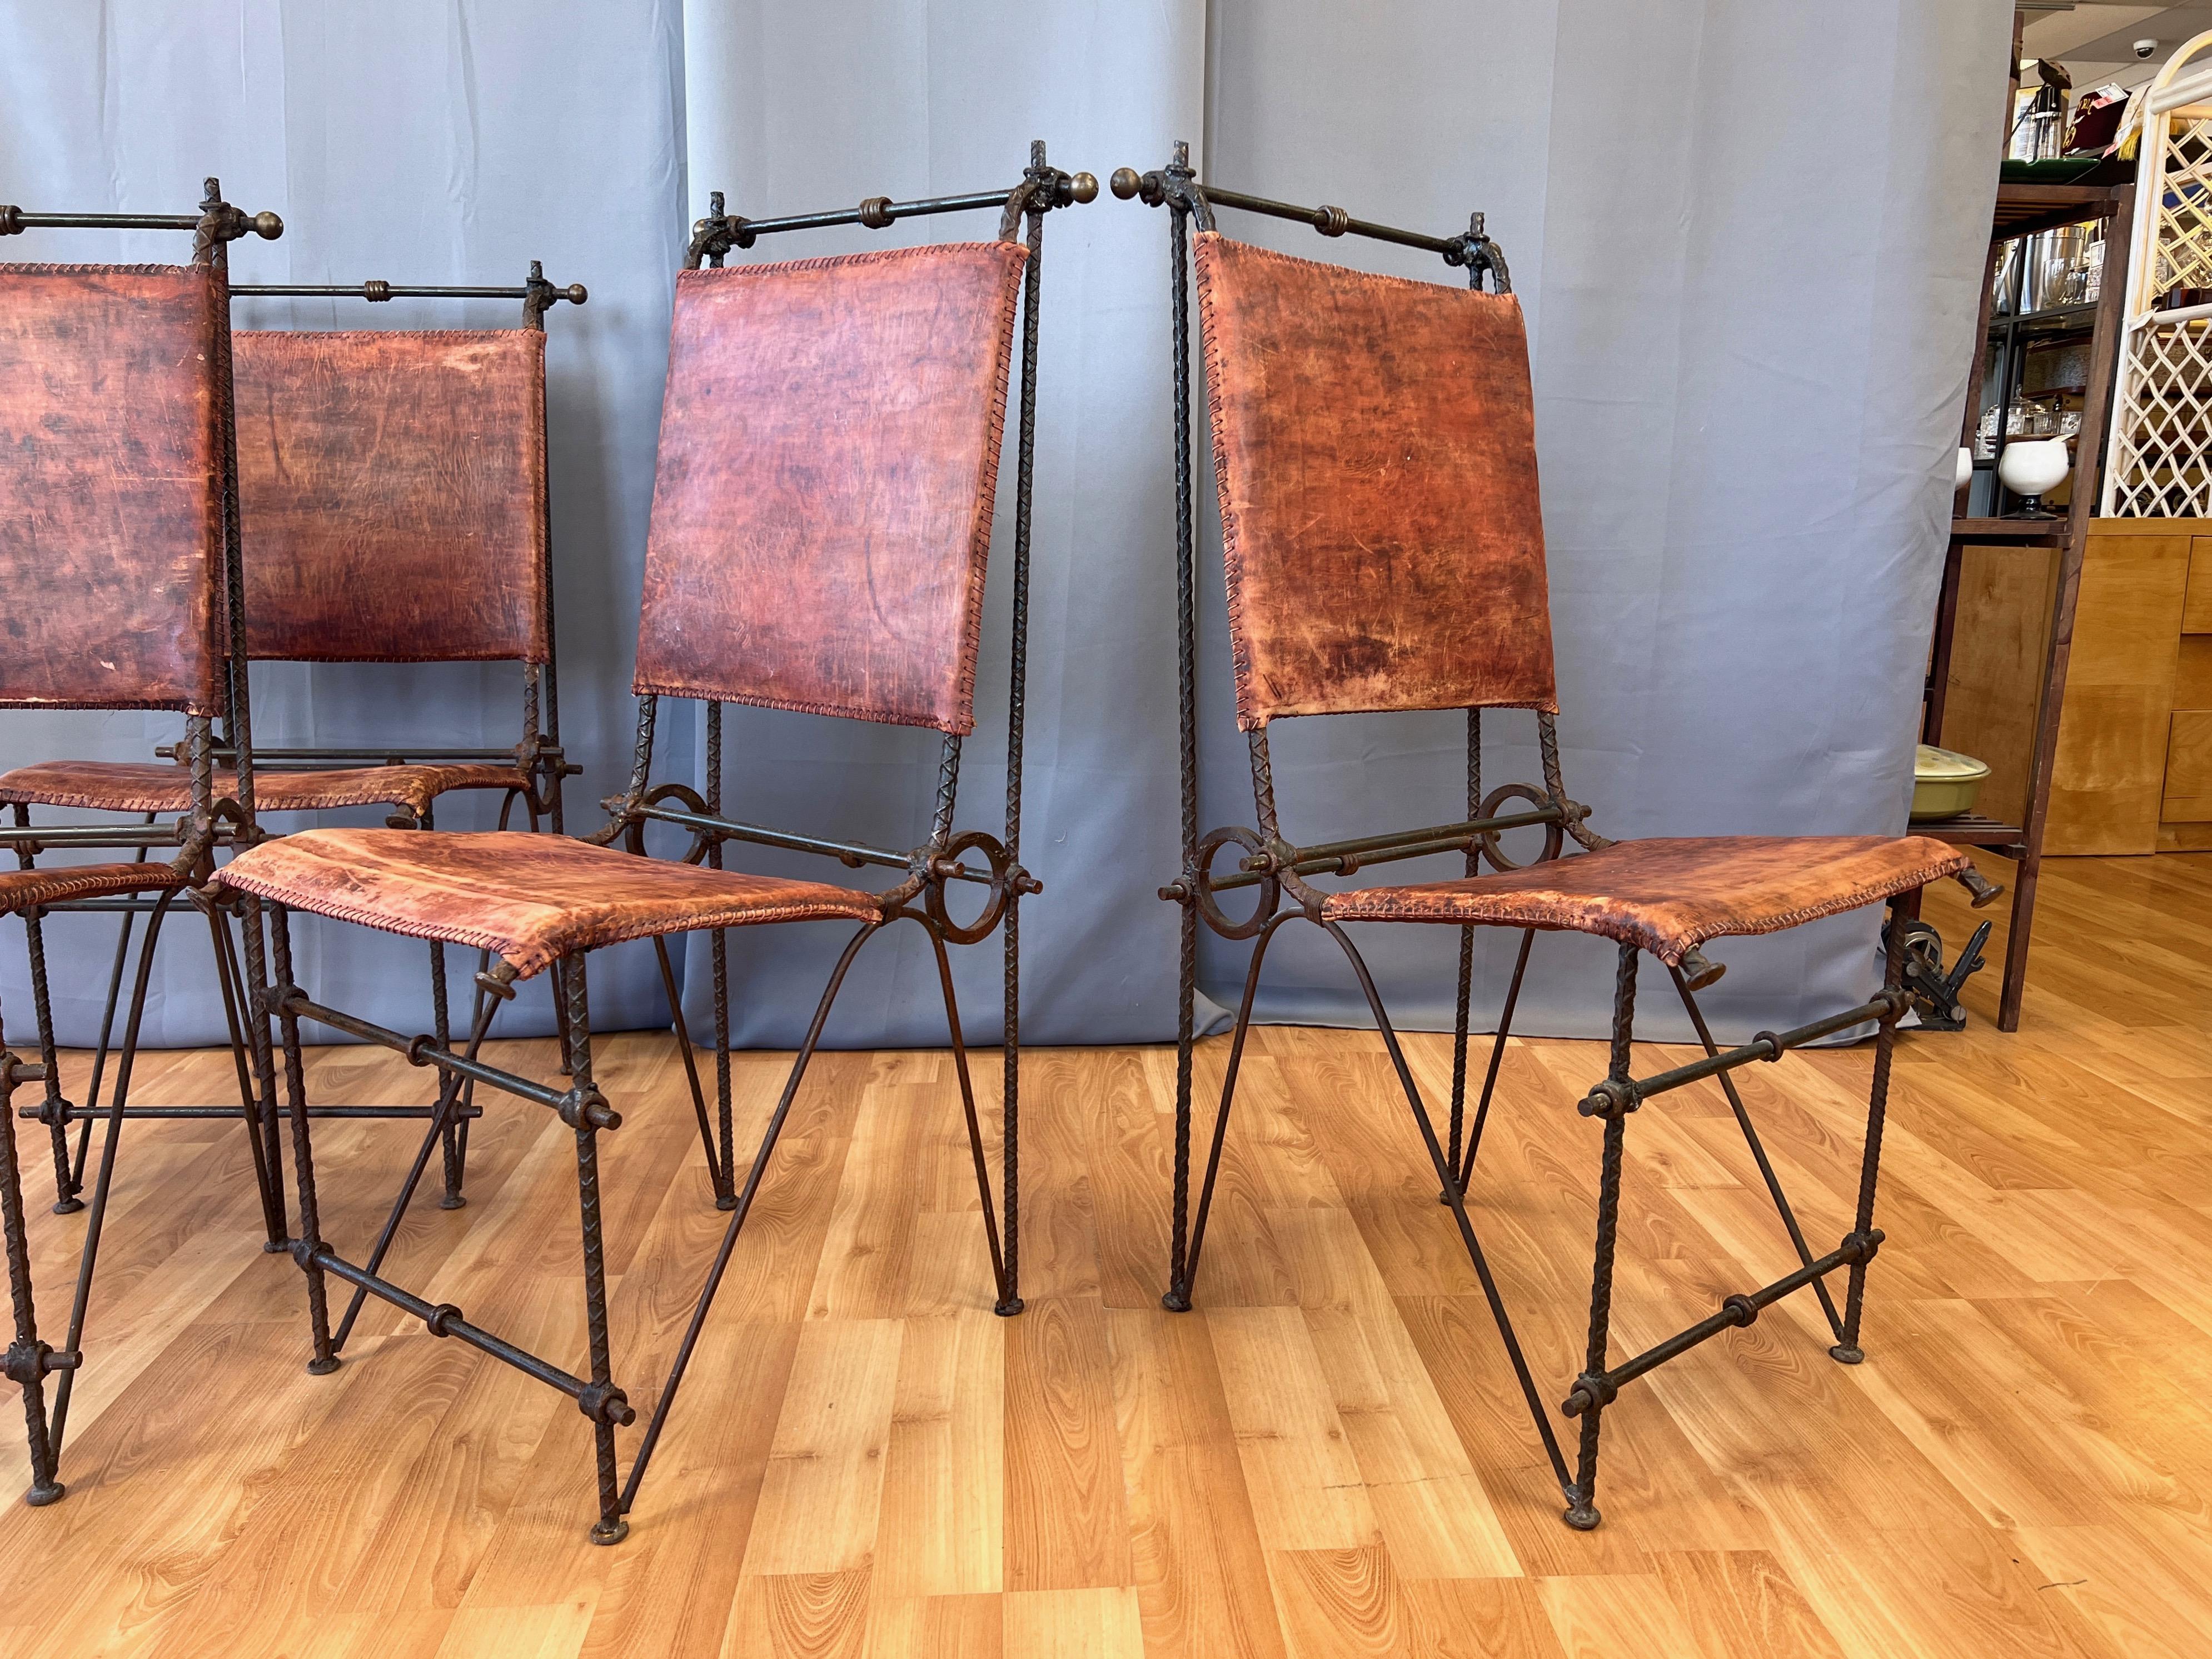 Set of 4 Ilana Goor-Attributed Brutalist Metal and Leather Dining Chairs, 1980 For Sale 1